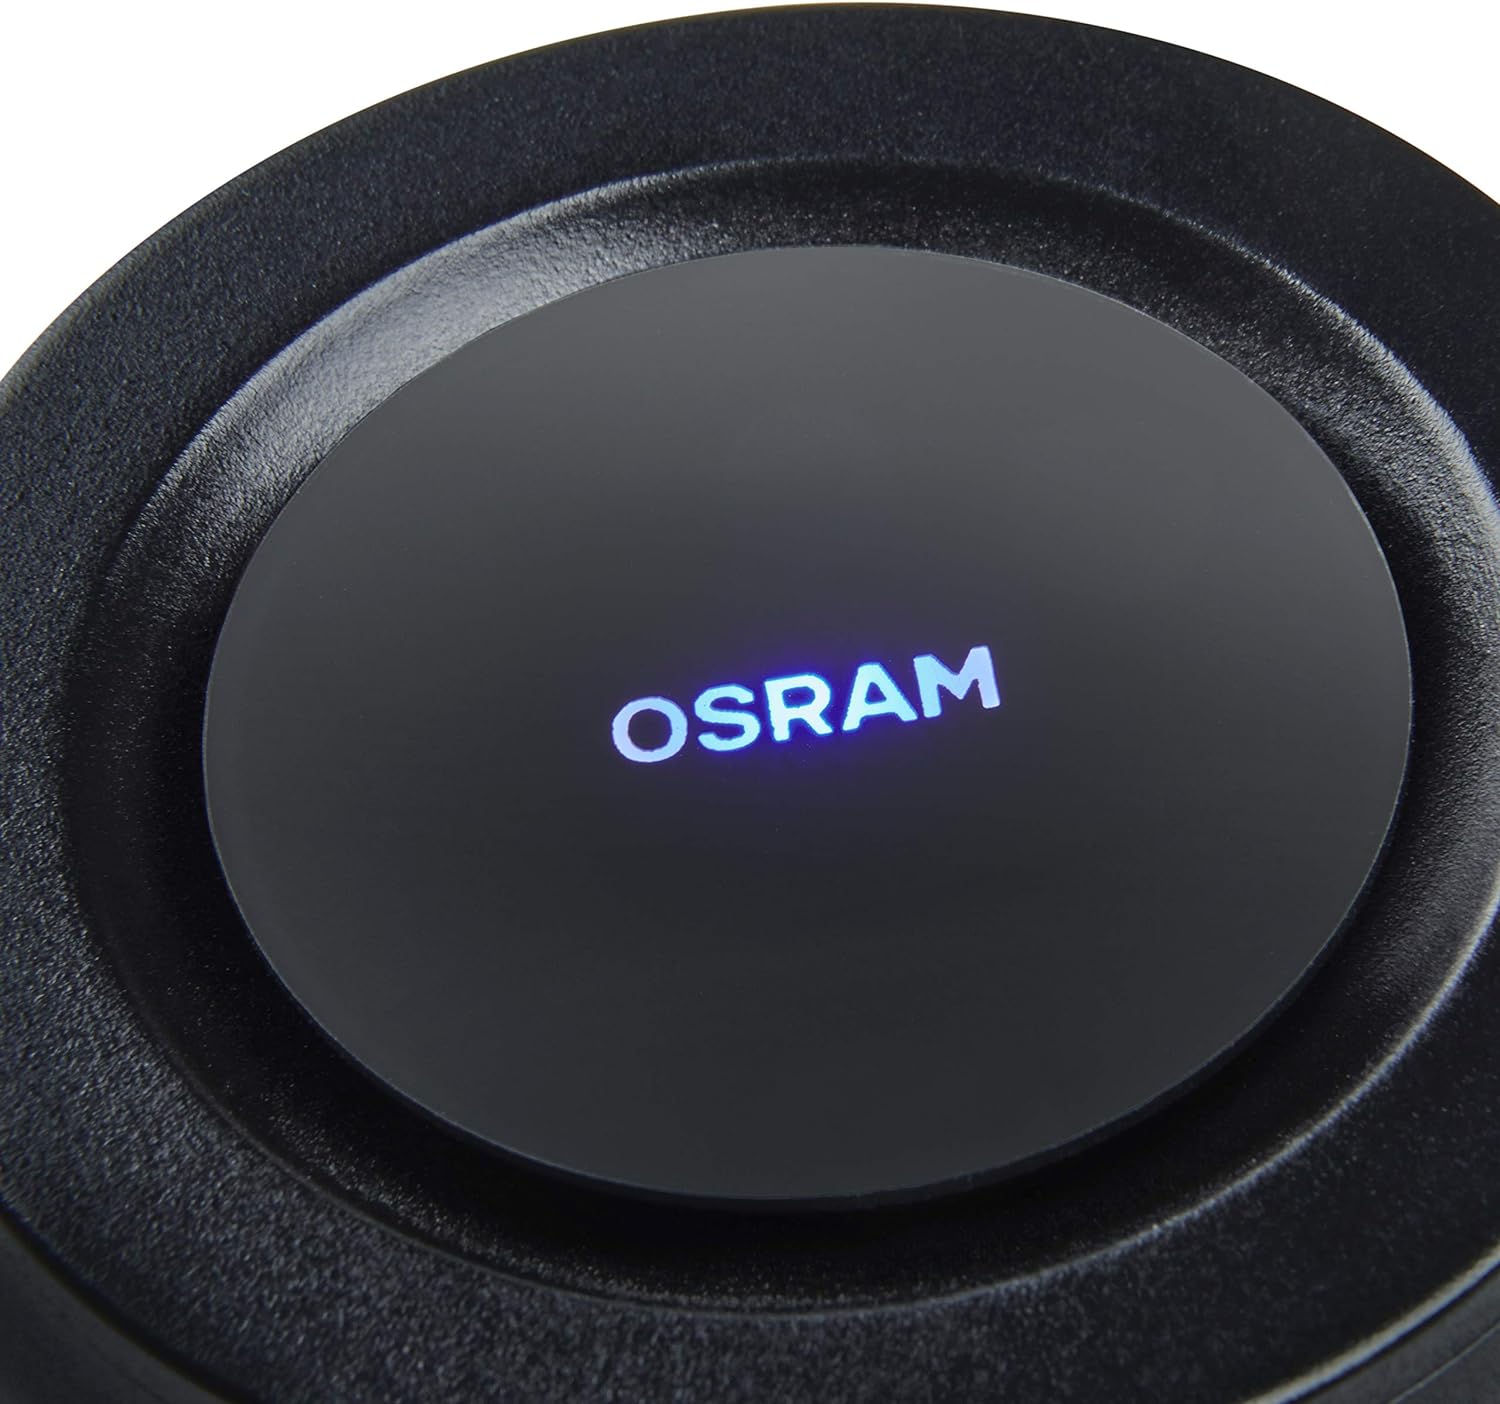 OSRAM LEDAS101 AirZing Mini Air Purifier, Car air purifier with USB port, Destroys viruses and bacteria in the vehicle up to 99 percent, High - tech TiO2 filter plus UVA LED light, Black - Amazing Gadgets Outlet